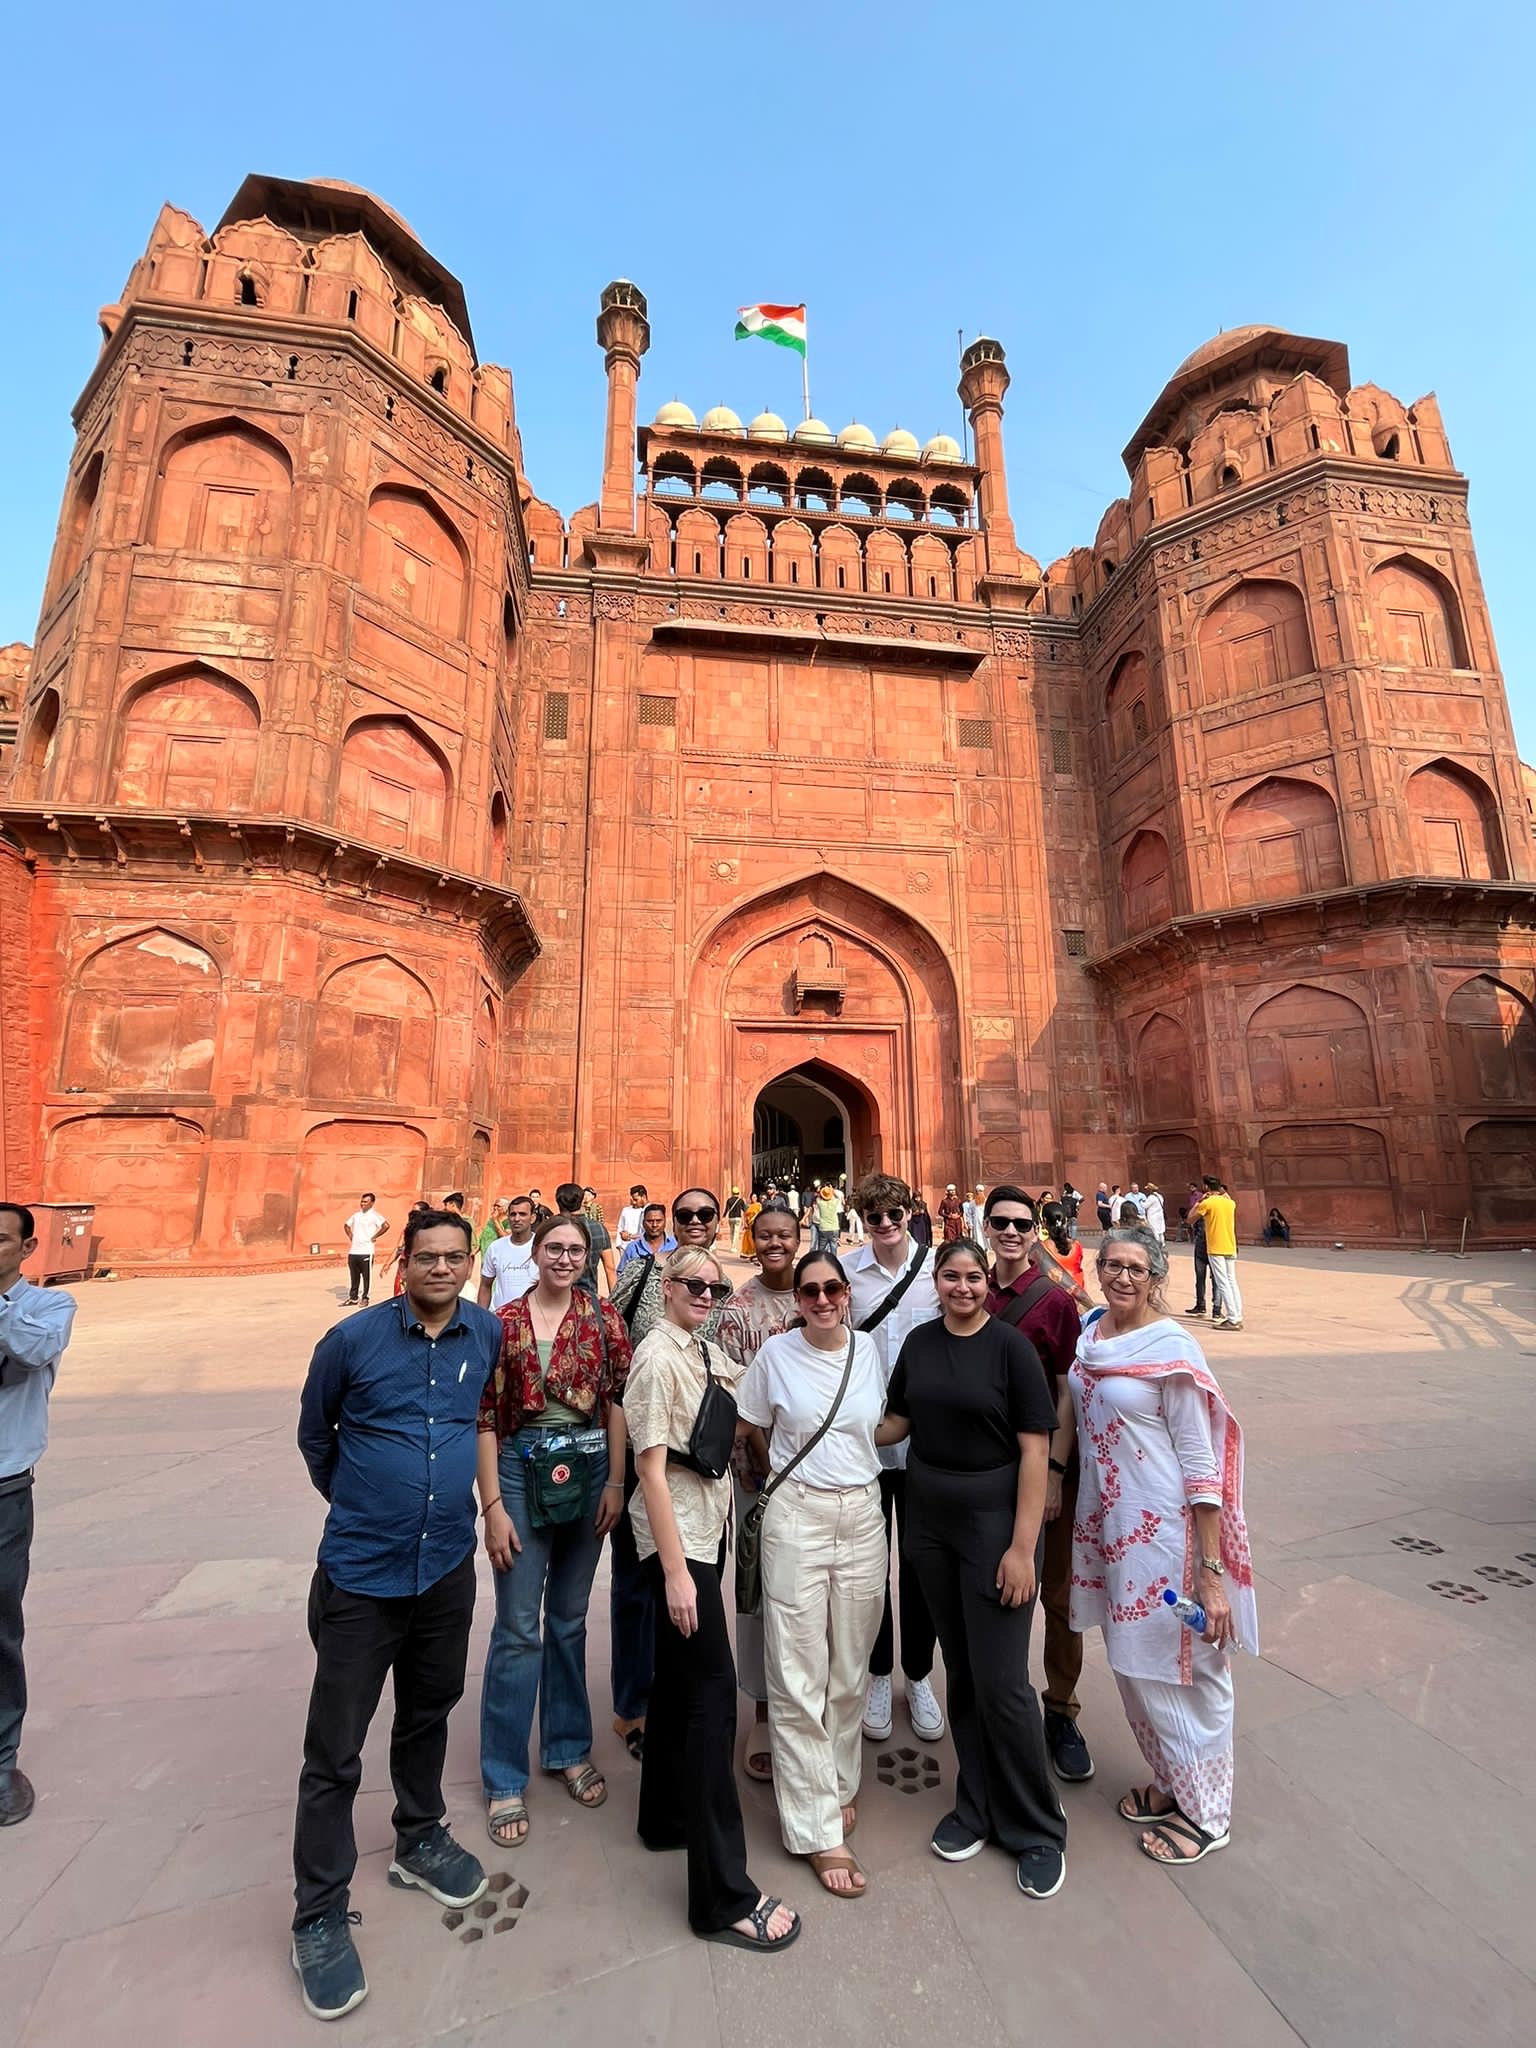 A colleague from PRIA and students and faculty from JMC stand in front of the entrance to the Red Fort in Delhi.